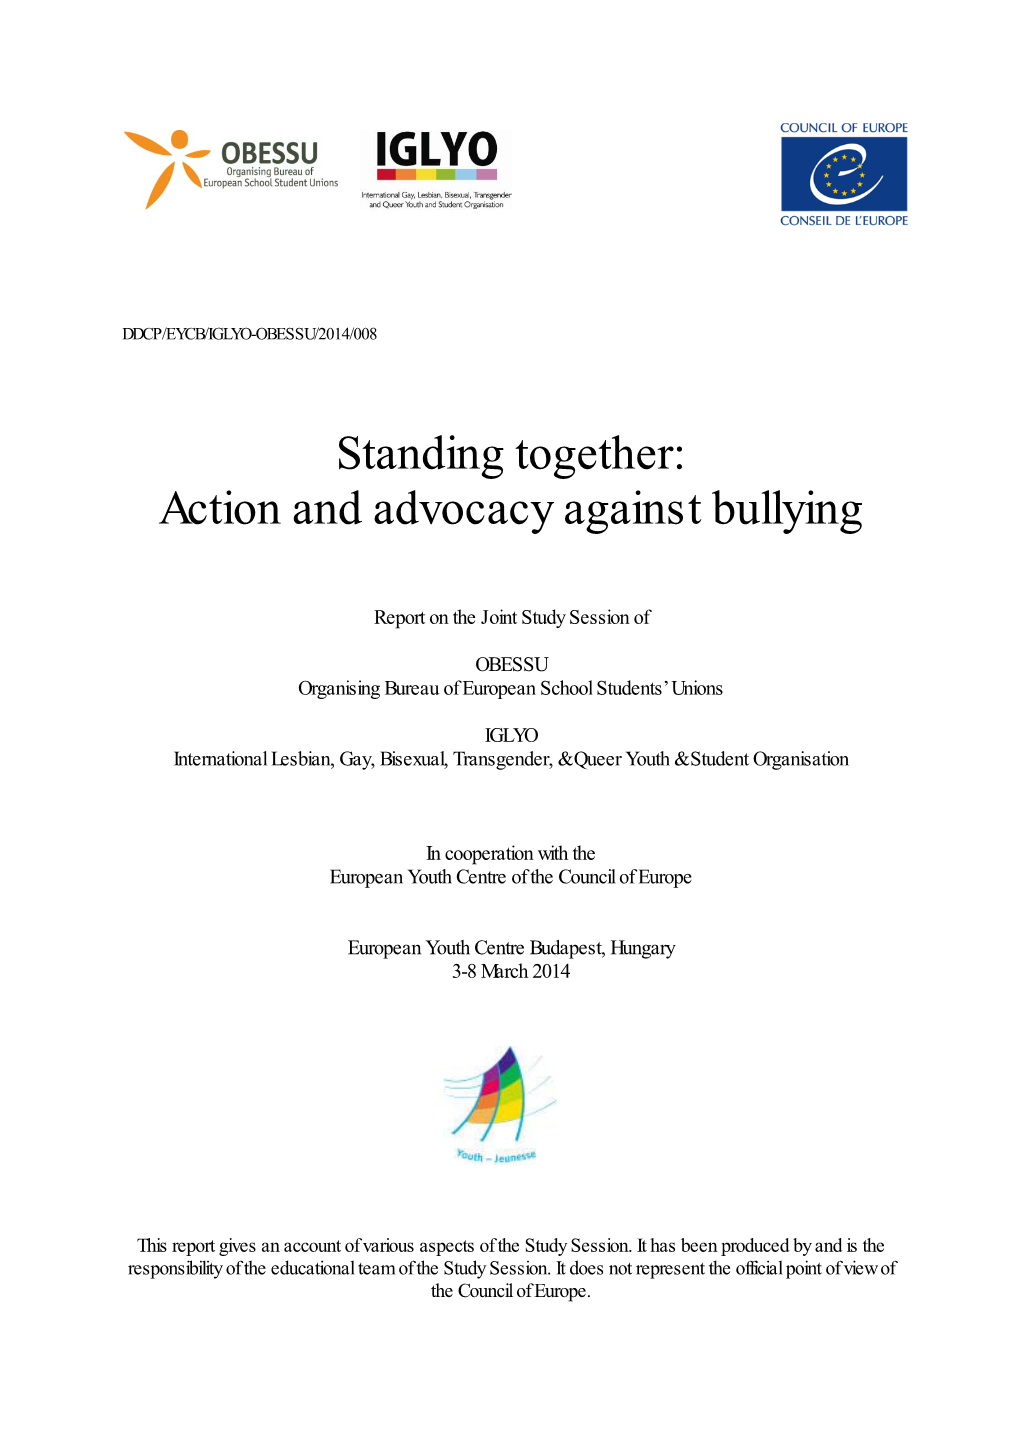 Action and Advocacy Against Bullying